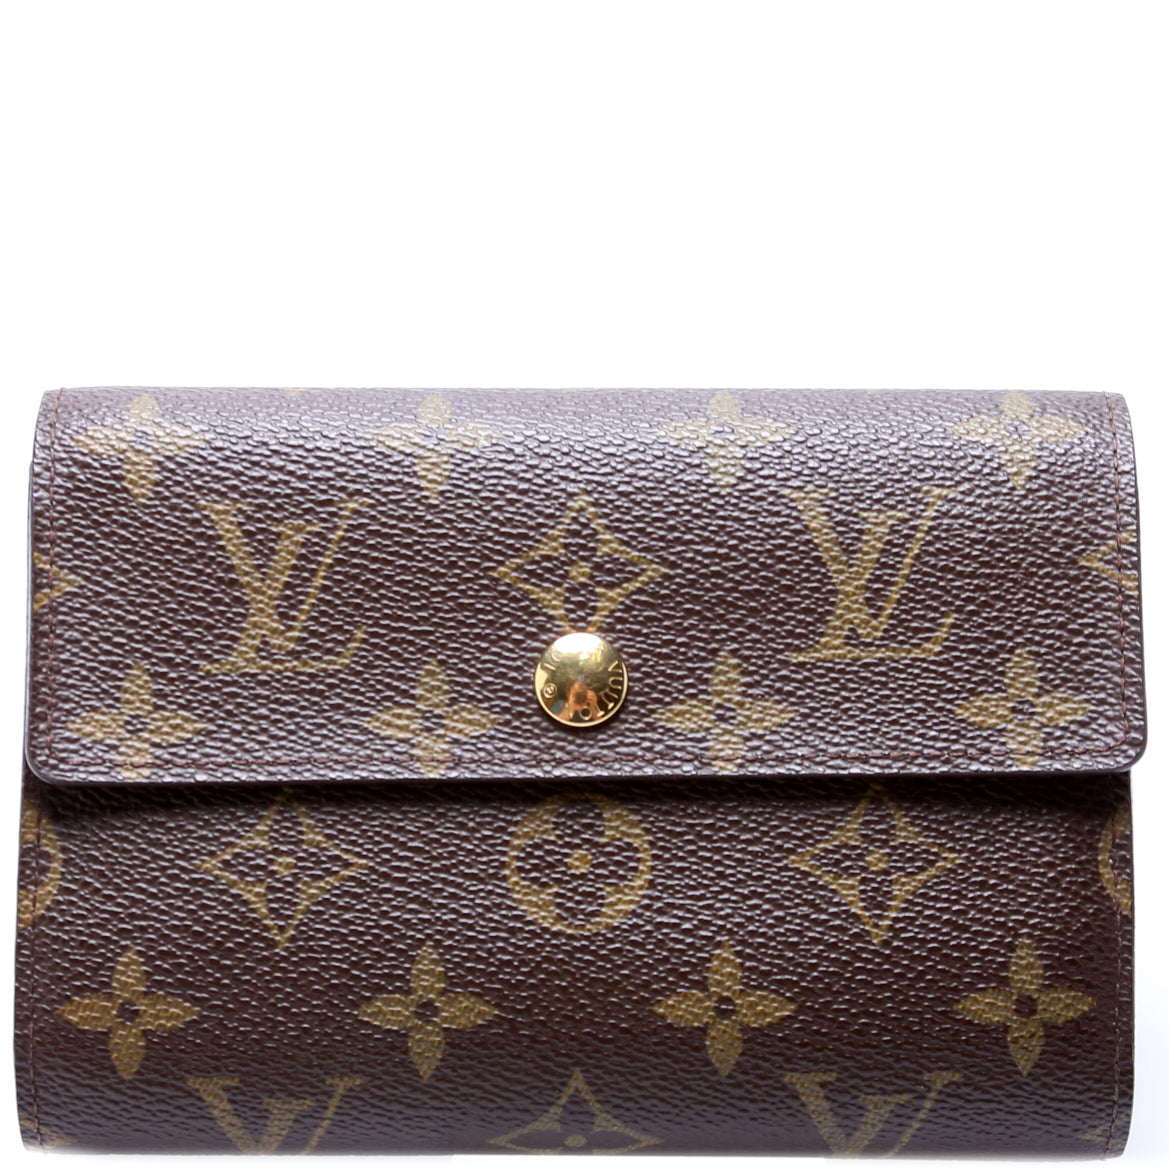 Louis Vuitton - Authenticated Alexandra Wallet - Patent Leather Brown for Women, Very Good Condition